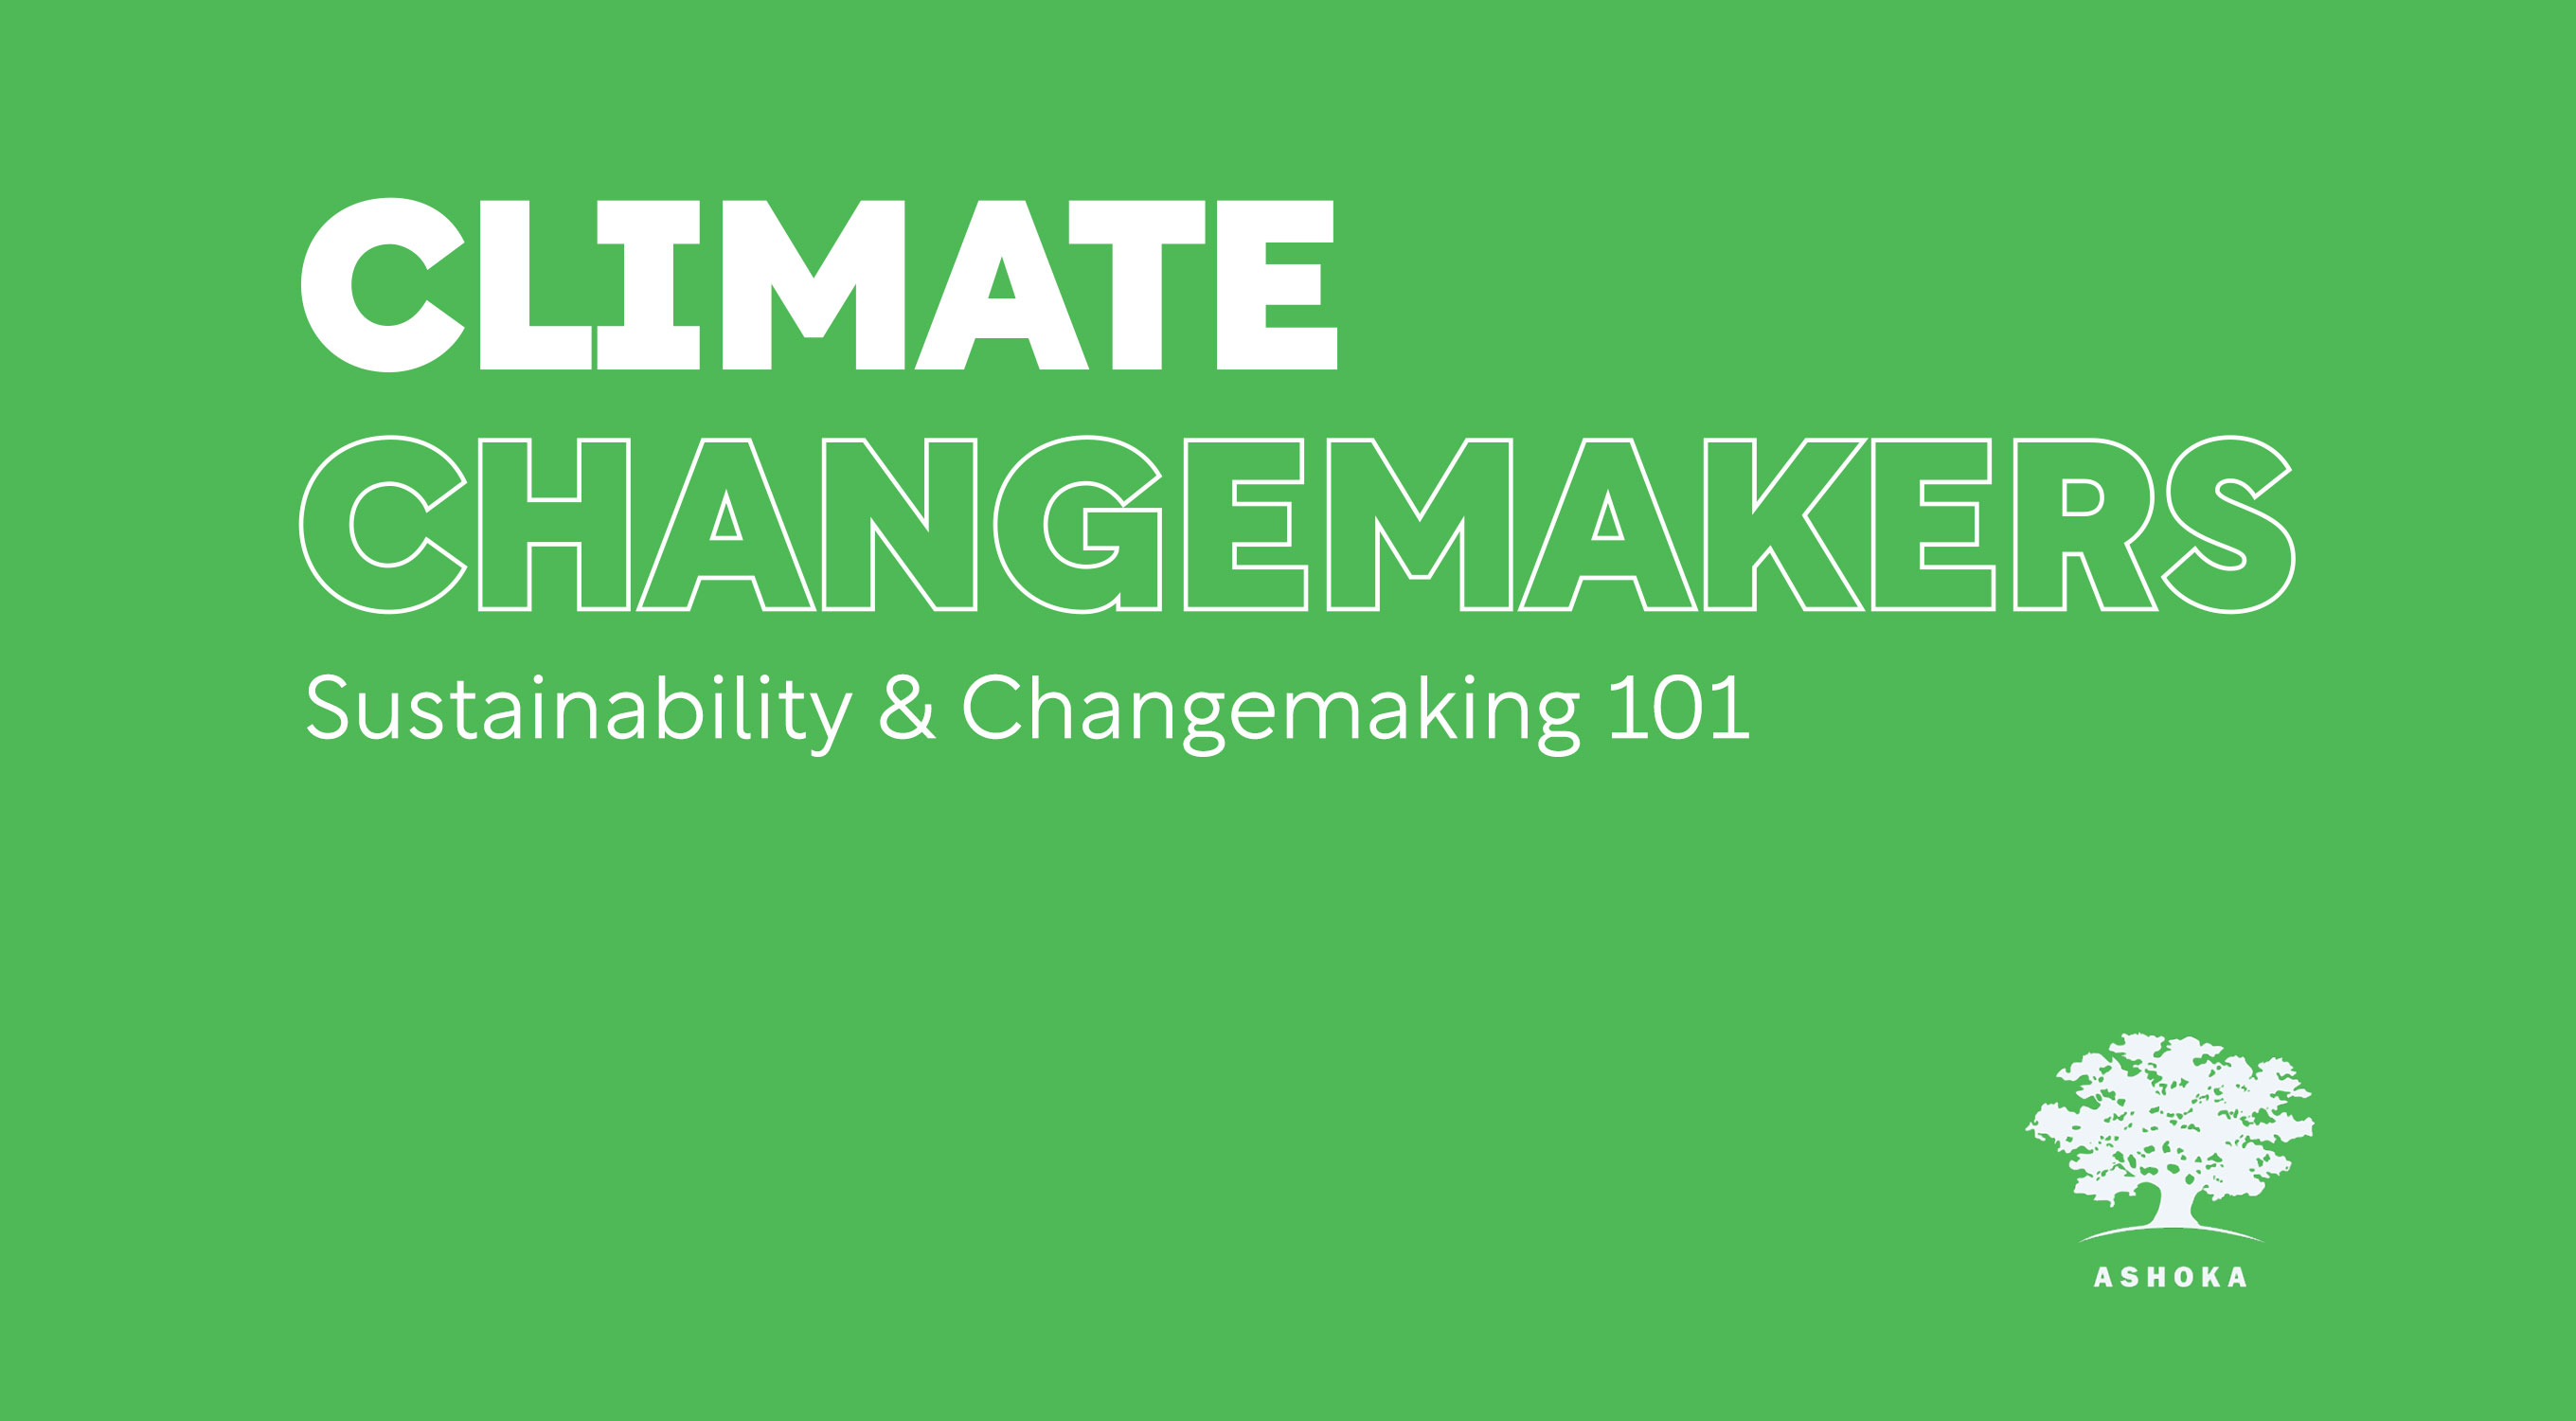 White text on a lime-green background. It reads "Climate Changemakers" as the title, and "Sustainability & Changemaking 101" as the subtitle. In the bottom right corner is Ashoka's logo.